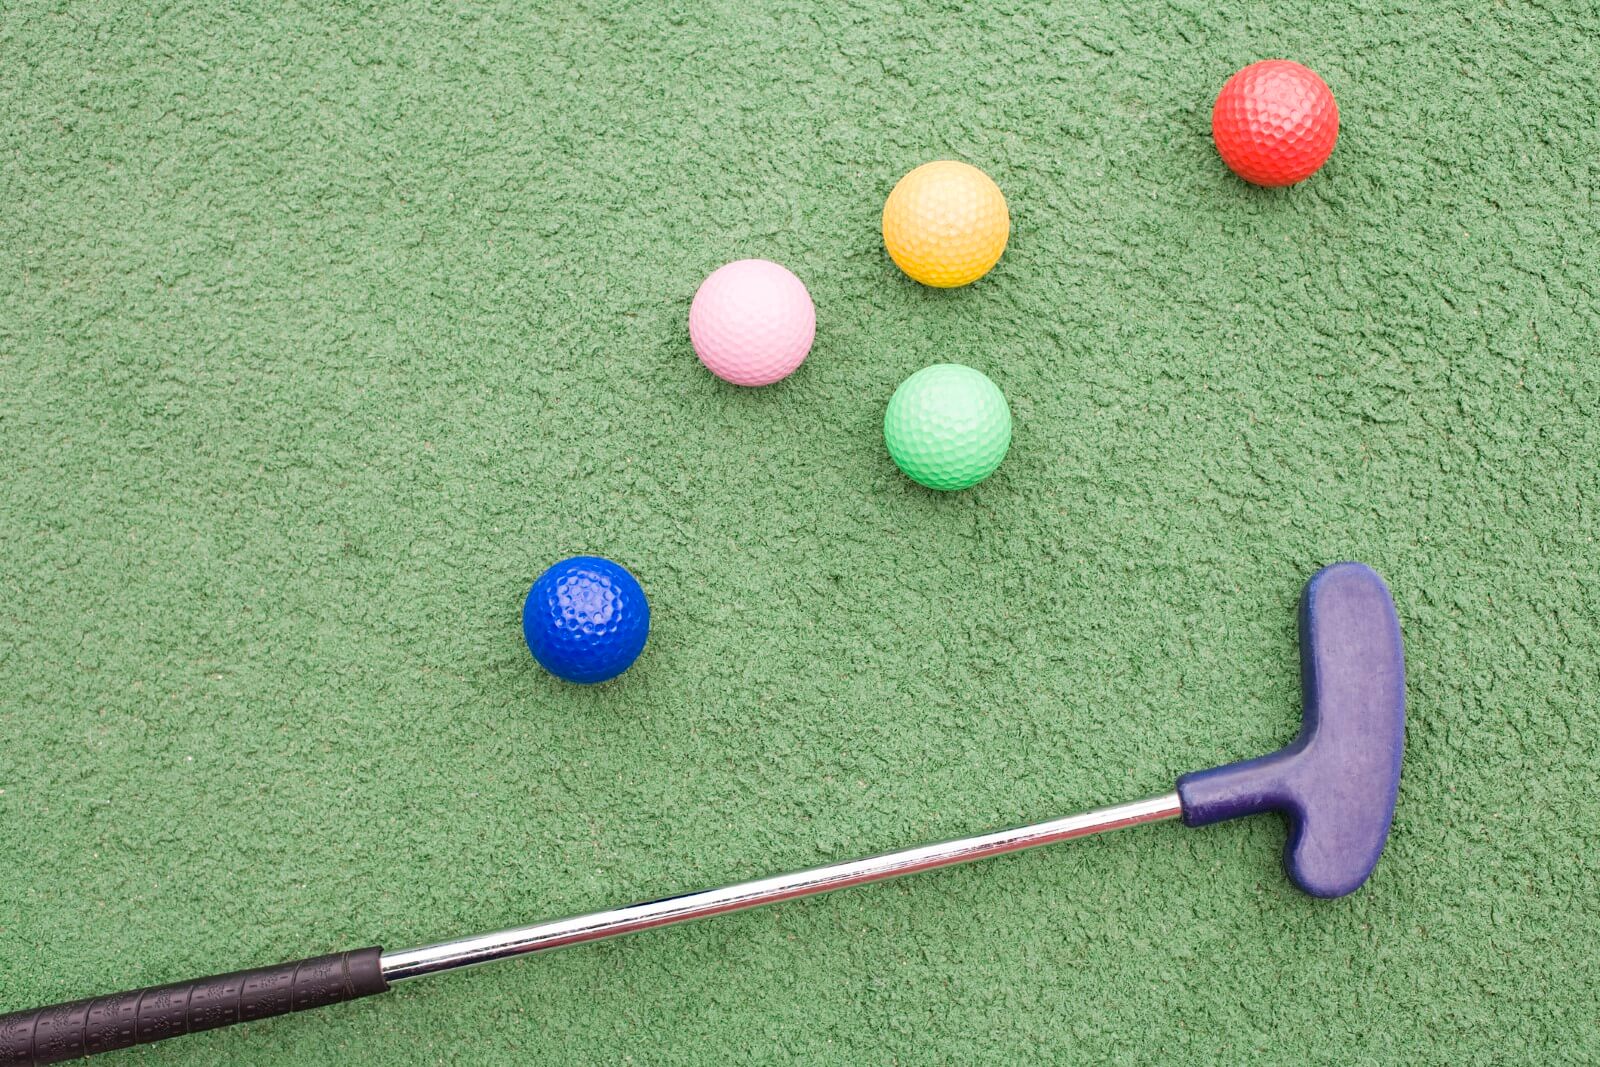 Mini golf putter and colorful balls.